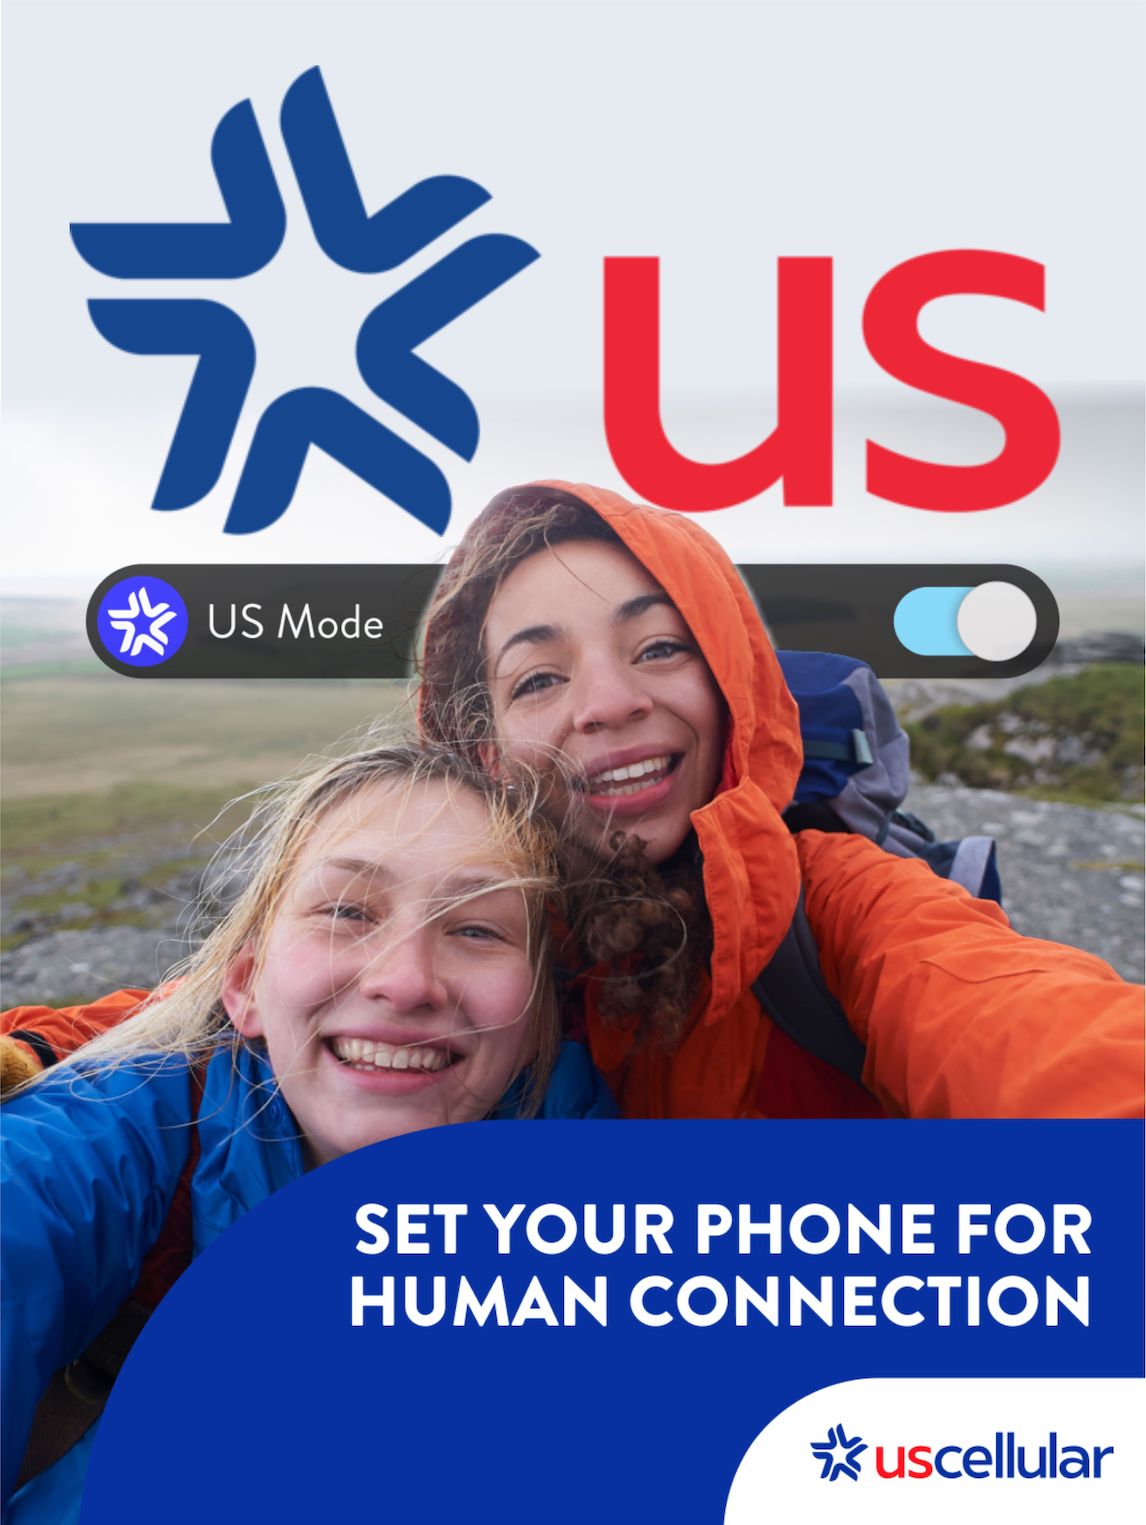 US Cellular- Download Images to View